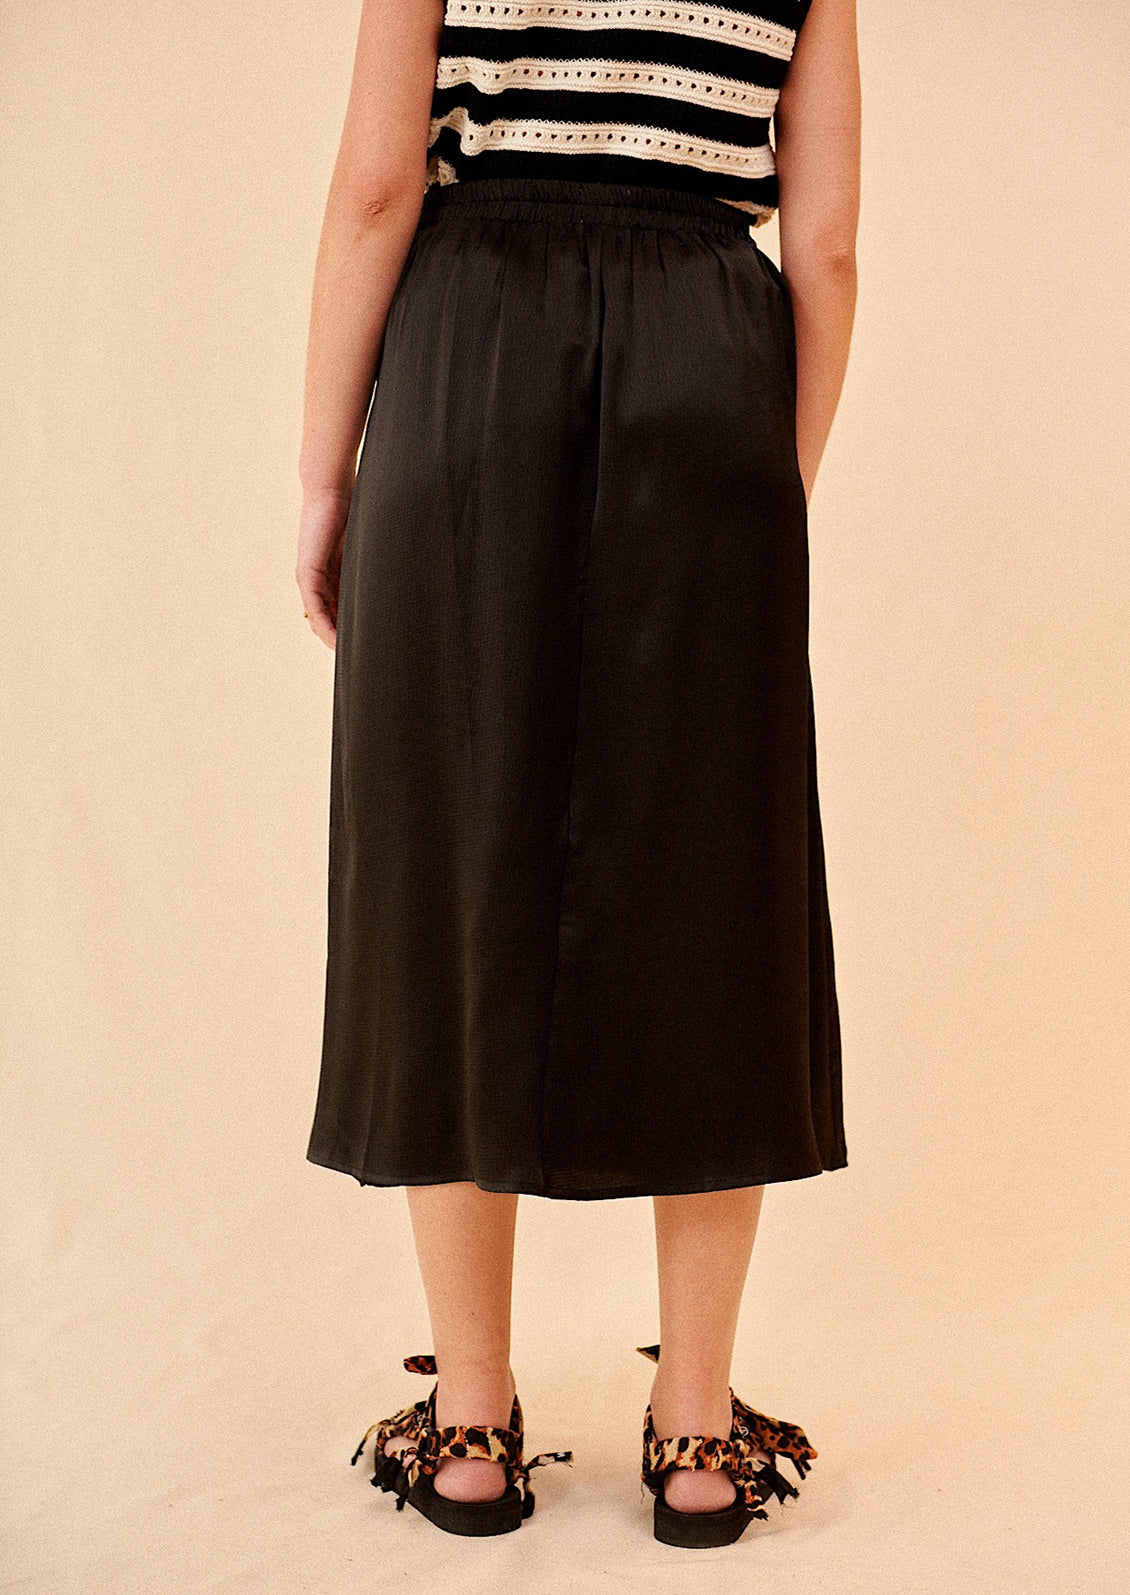 Woman wearing black midi skirt and sandals, seen from behind. 